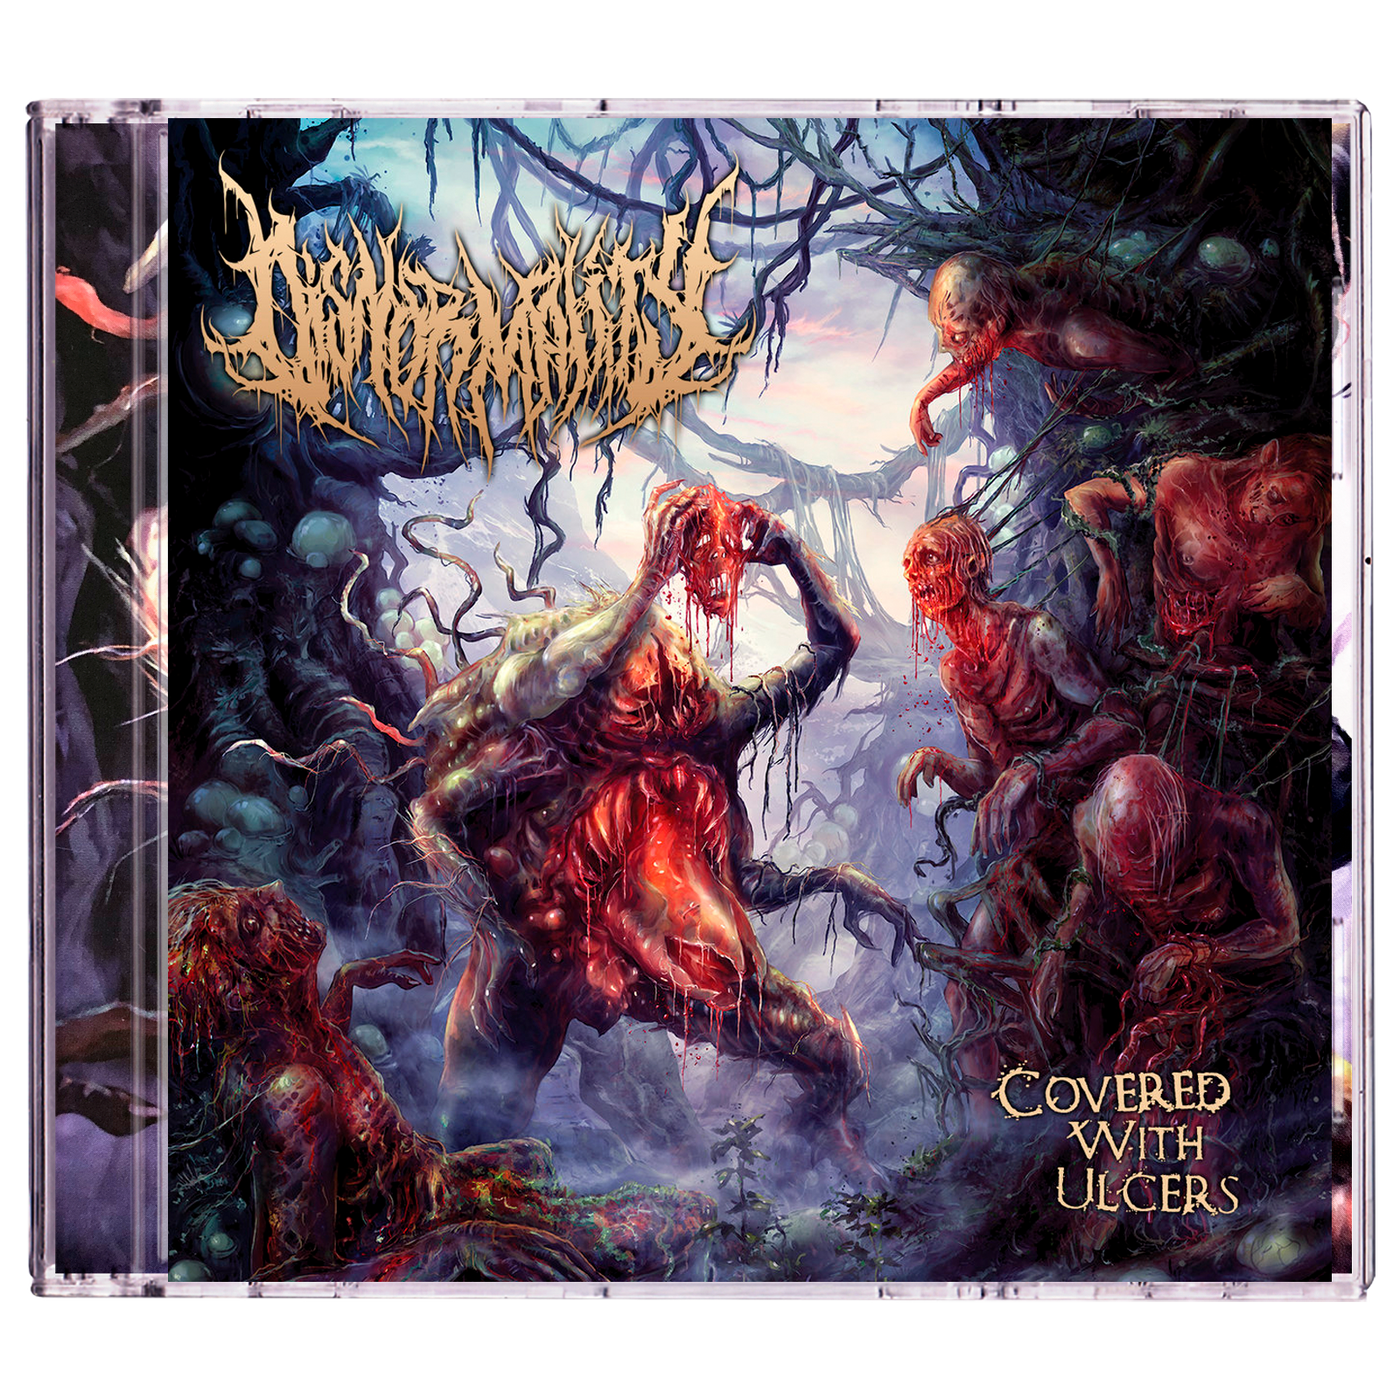 Disnormality 'Covered With Ulcers' CD